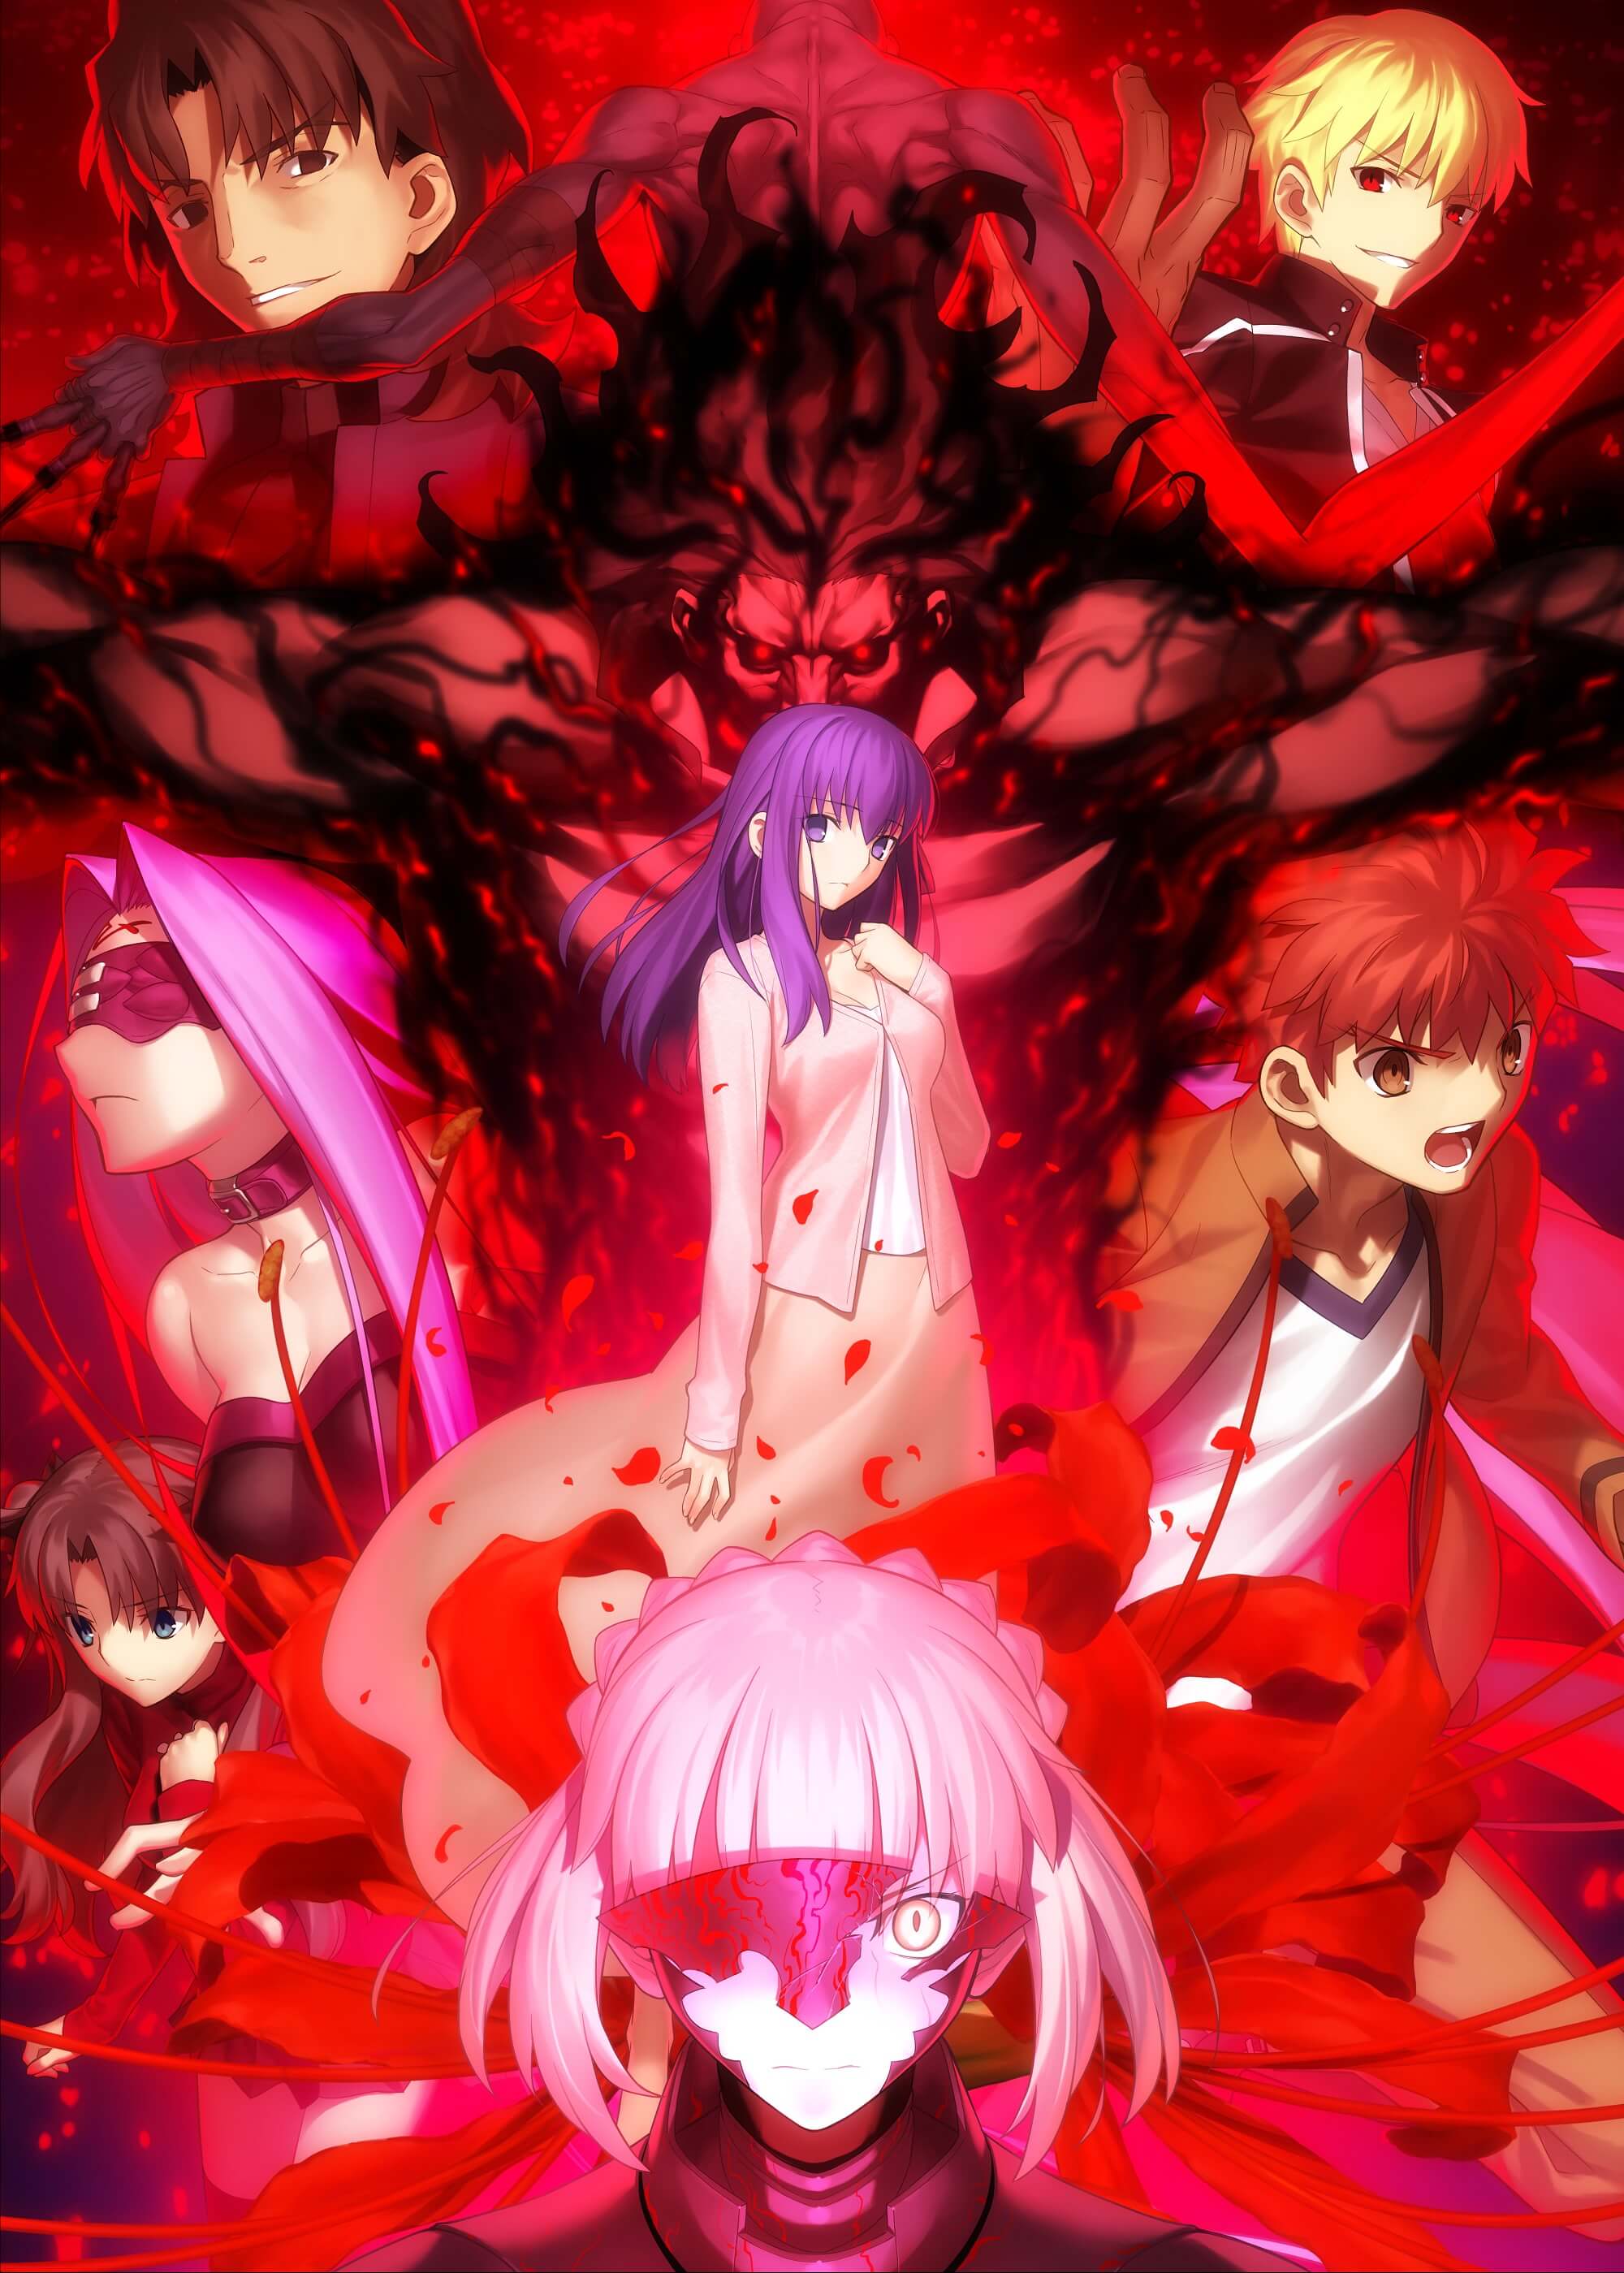 Fate/stay night Heaven's Feel II. Releases Visual and PV!